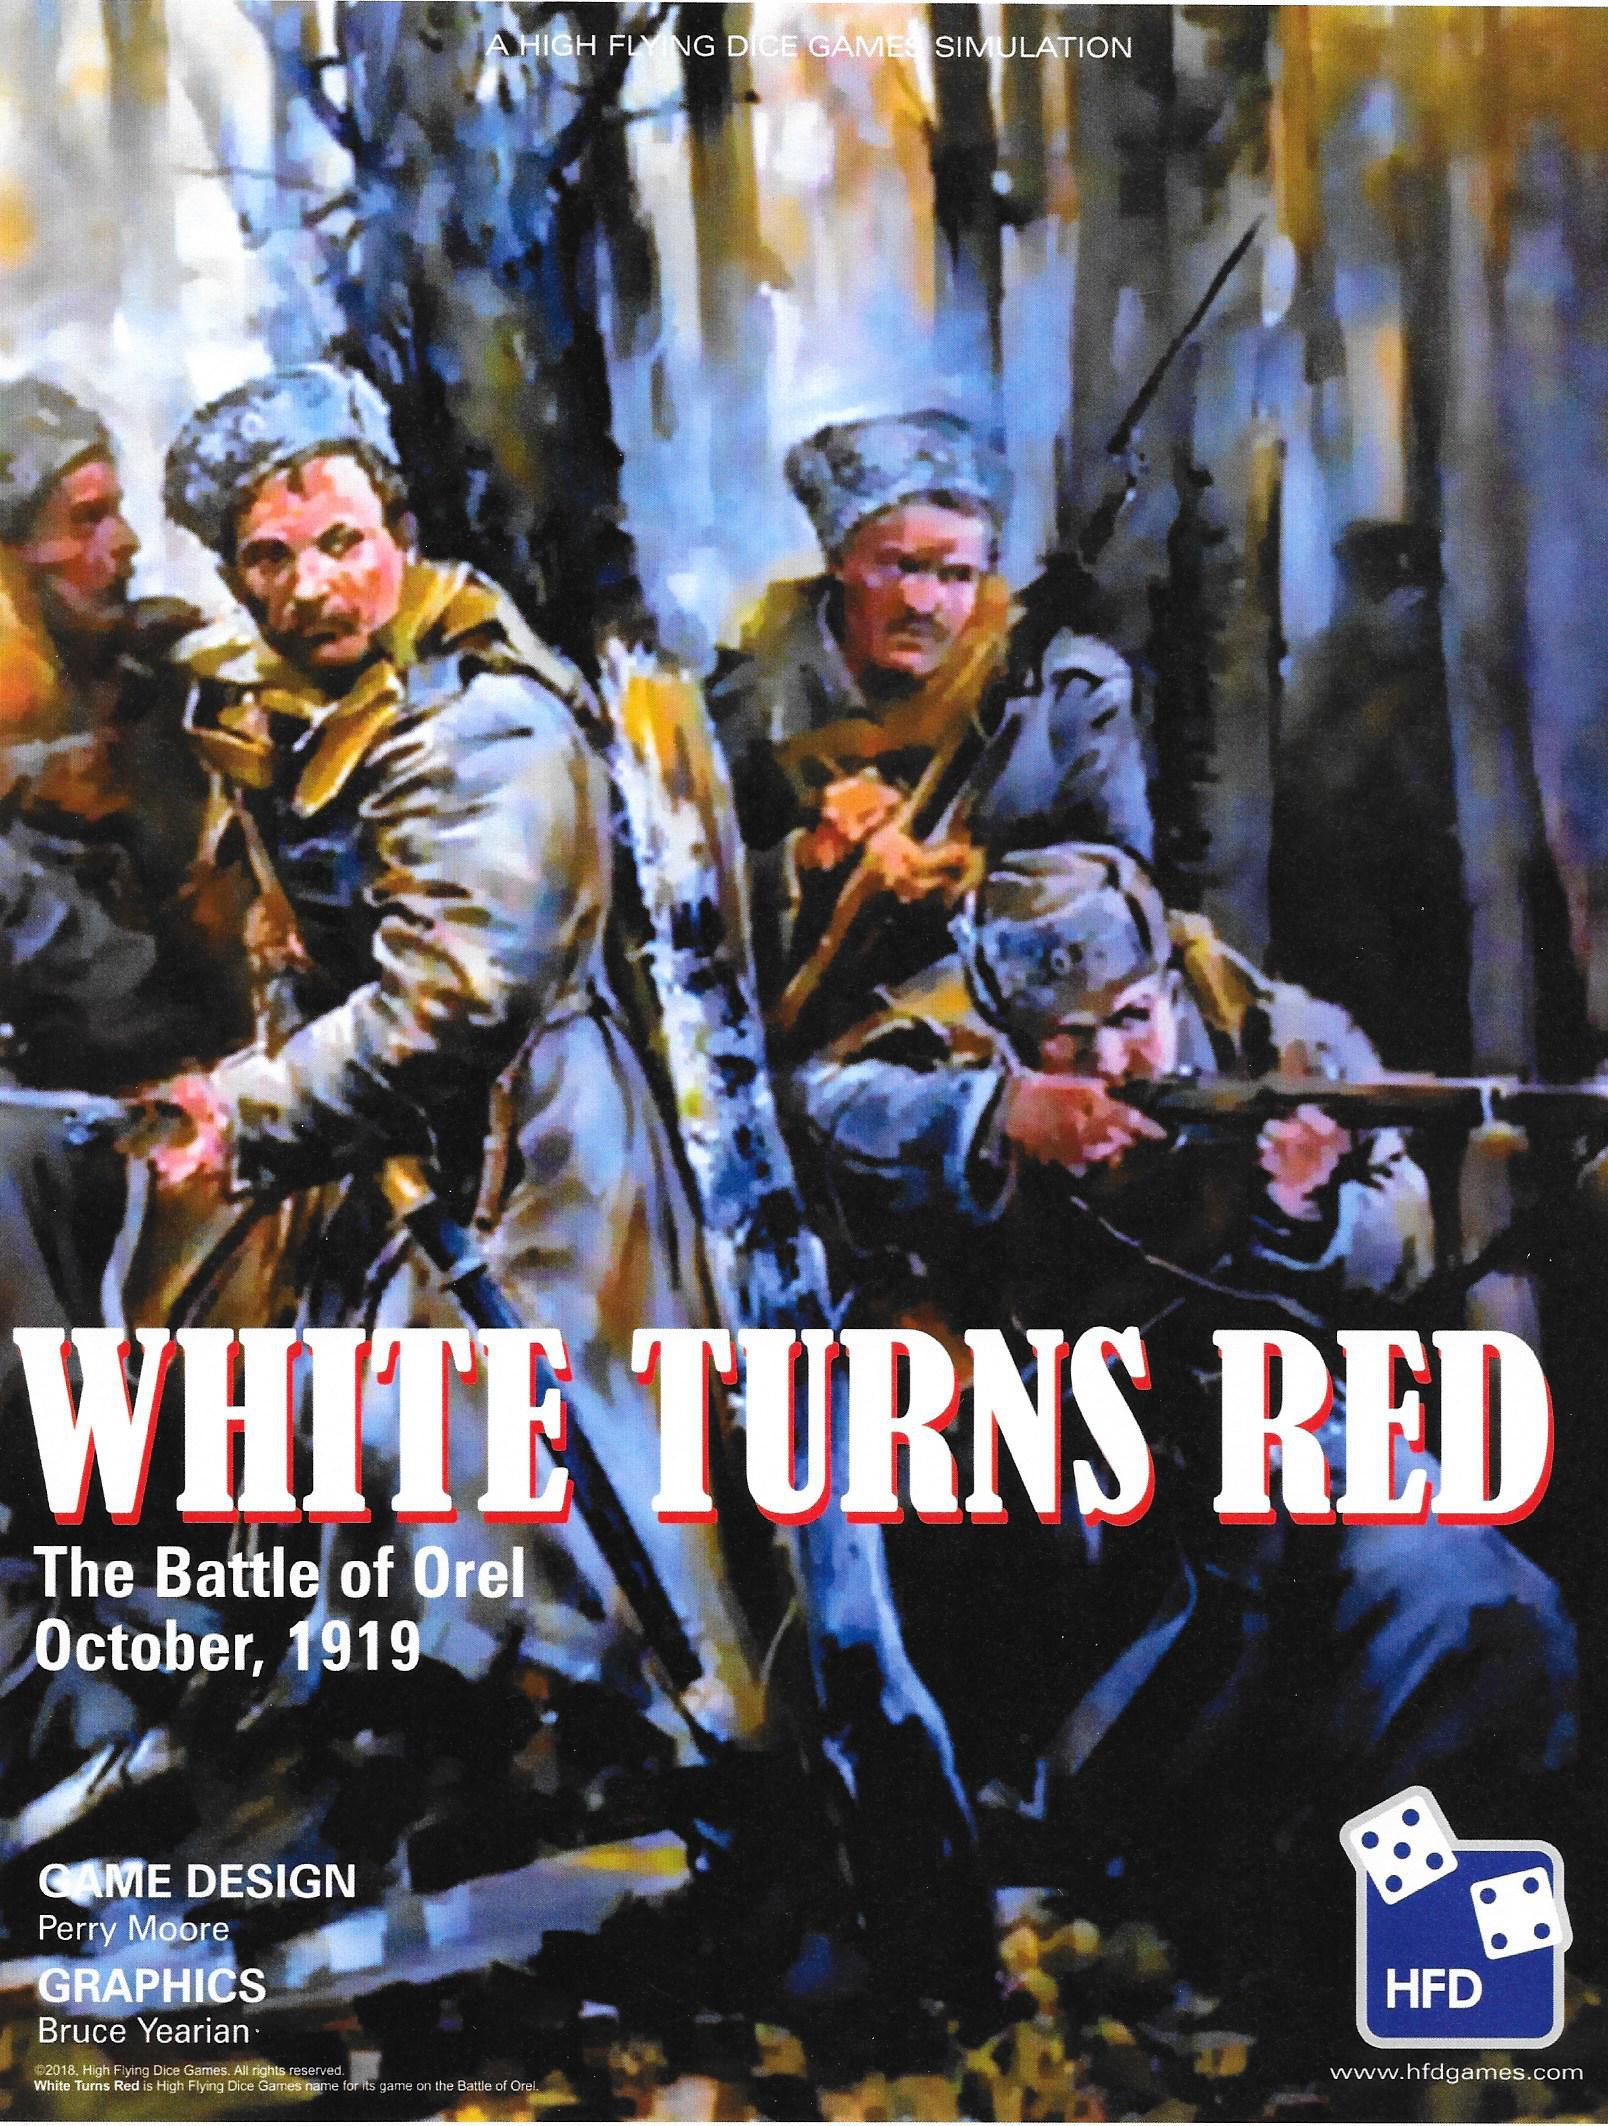 White Turns Red: The Battle of Orel. Oct. 1919